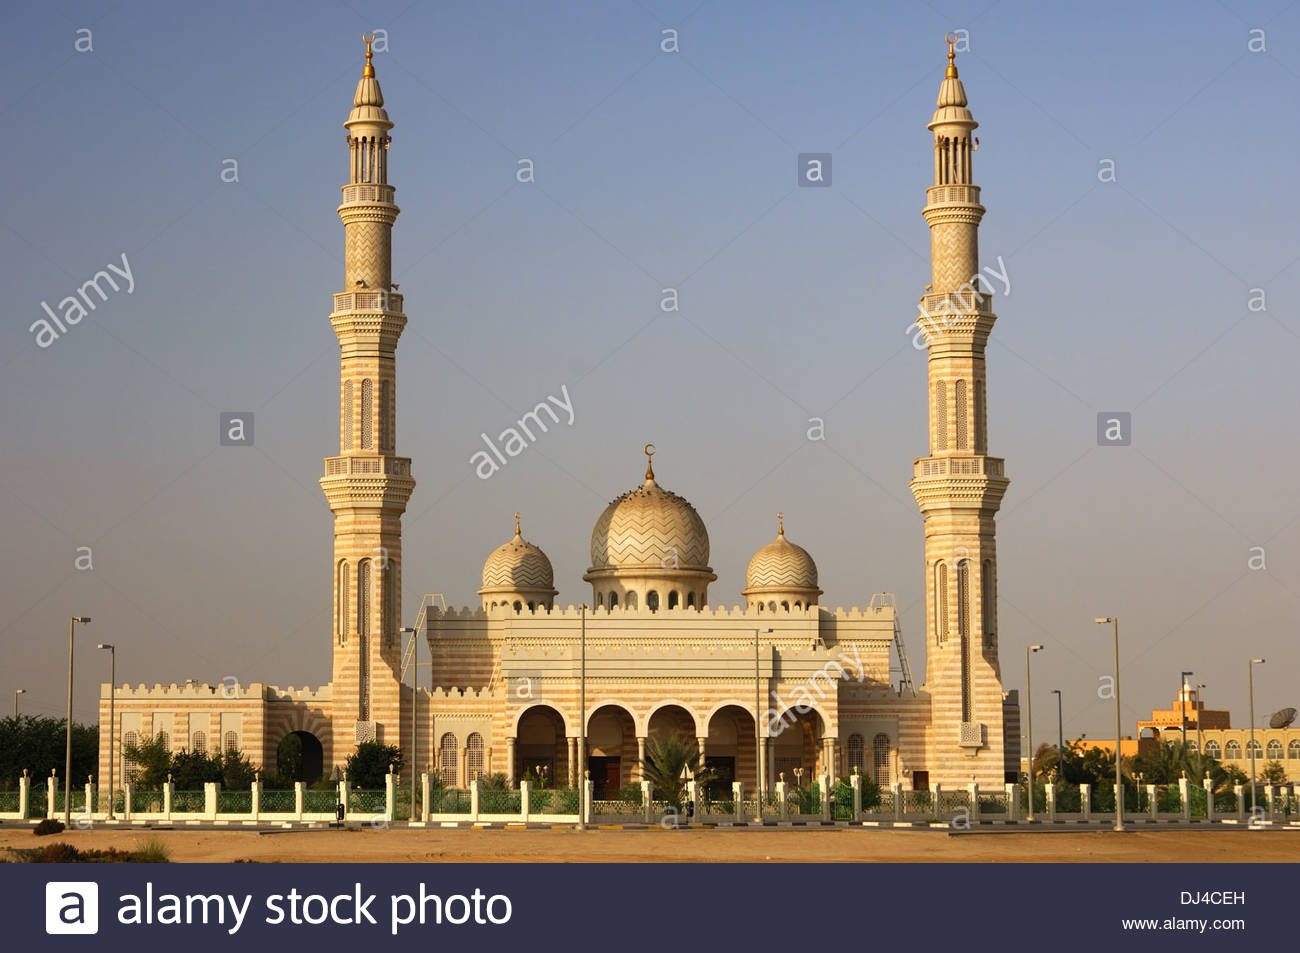 Mosque Of Two Minarets Backgrounds on Wallpapers Vista